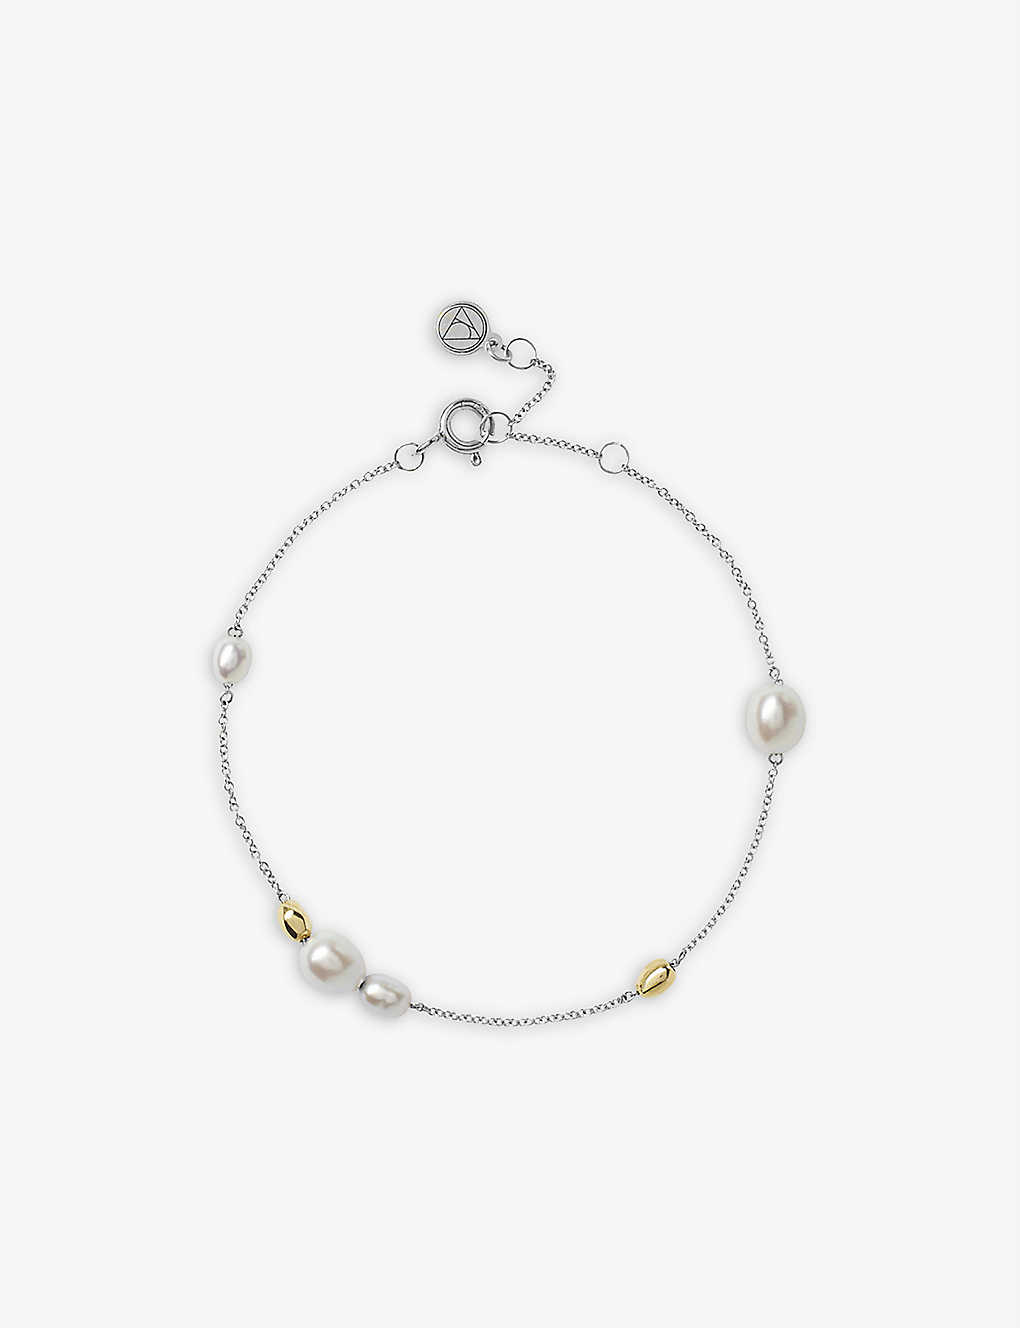 The Alkemistry Womens 18ct White Gold Vianna 18ct White-gold, Yellow-gold Bead And Pearl Bracelet